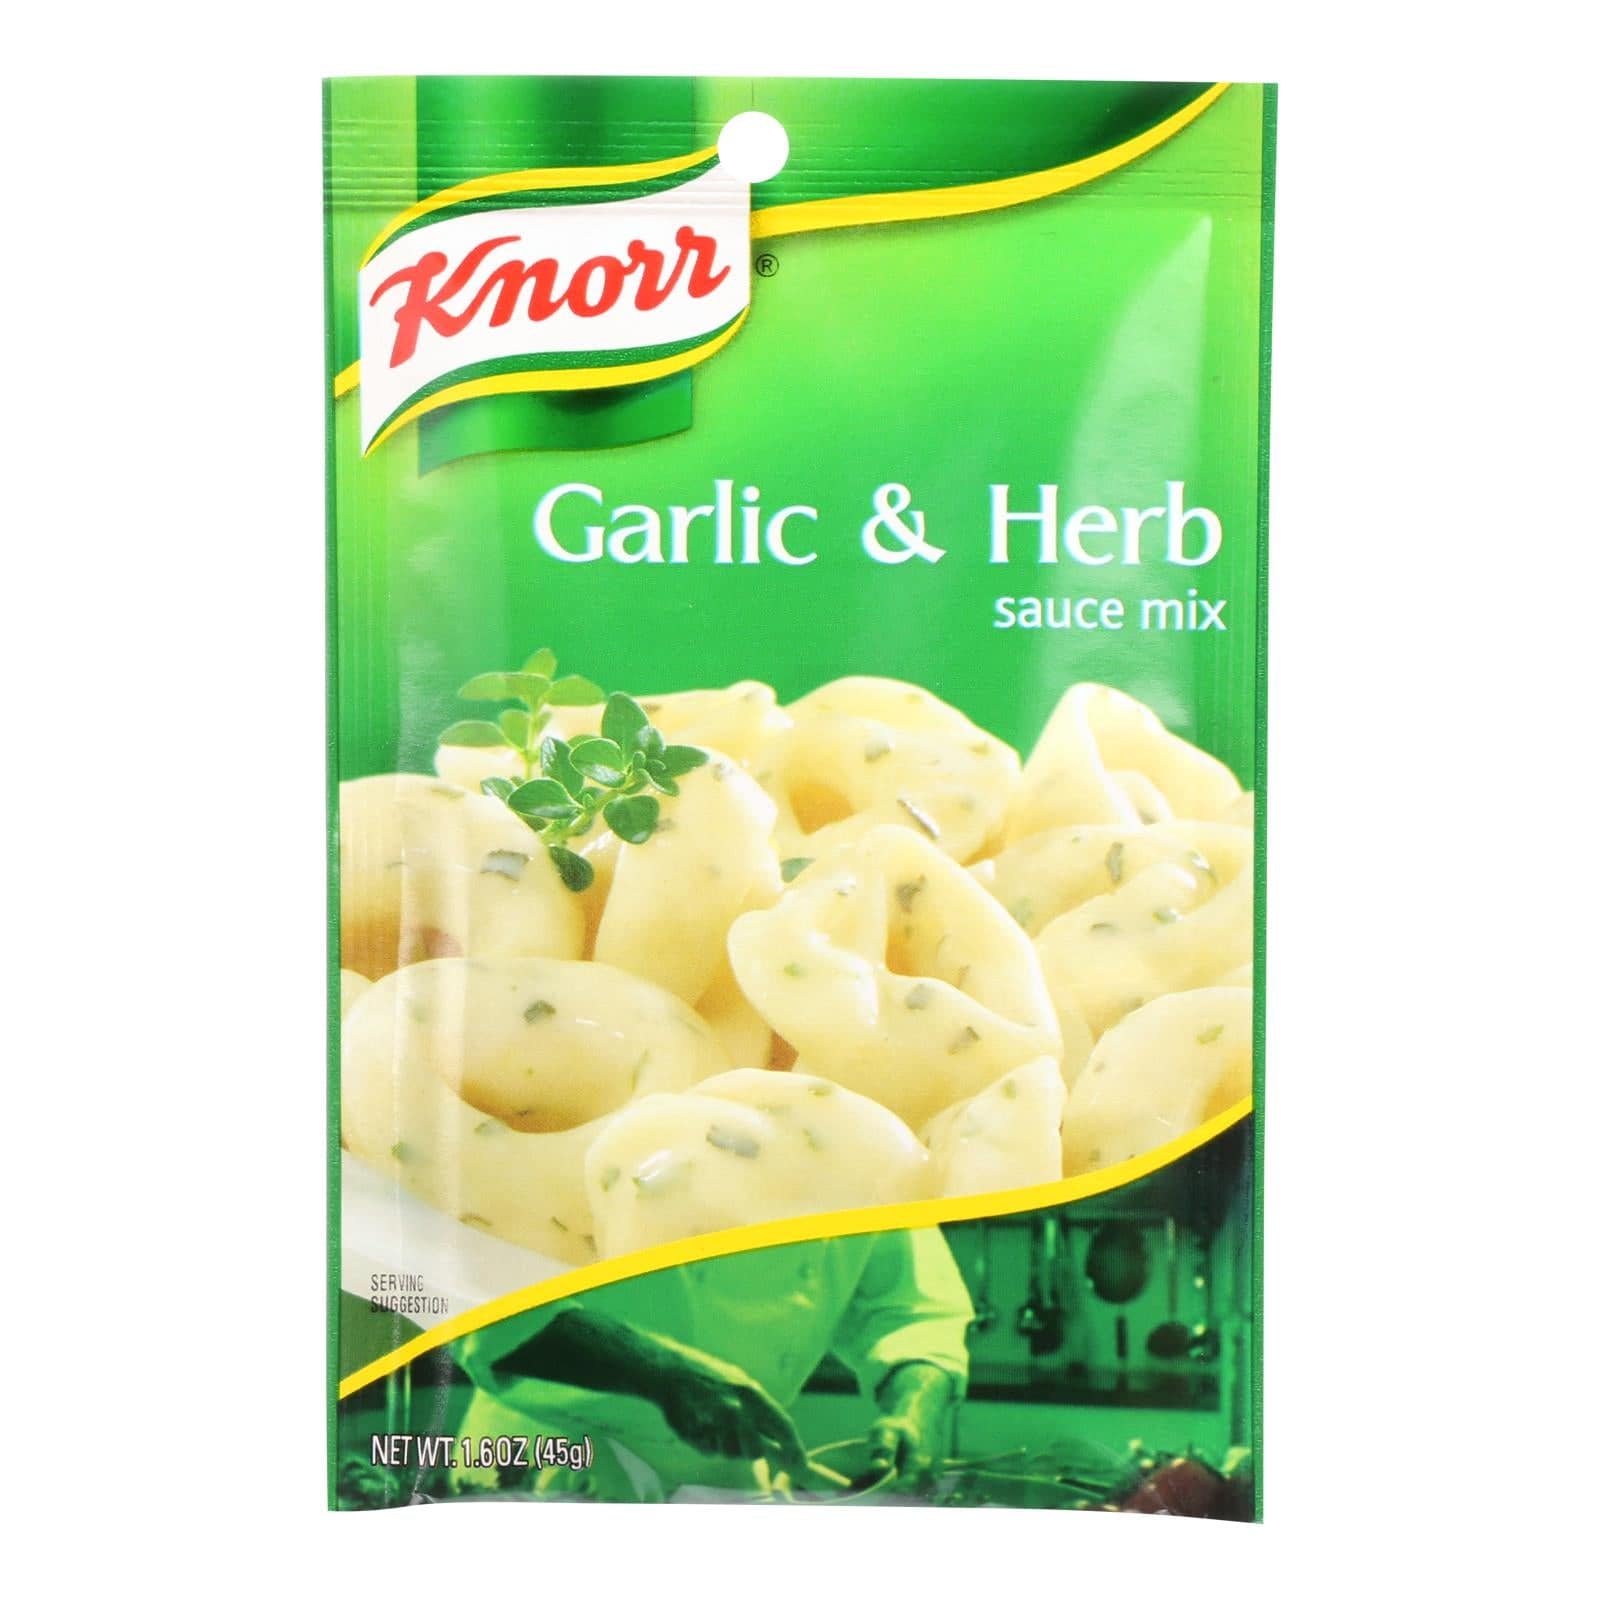 Buy Knorr Sauce Mix - Garlic And Herb - 1.6 Oz - Case Of 12  at OnlyNaturals.us